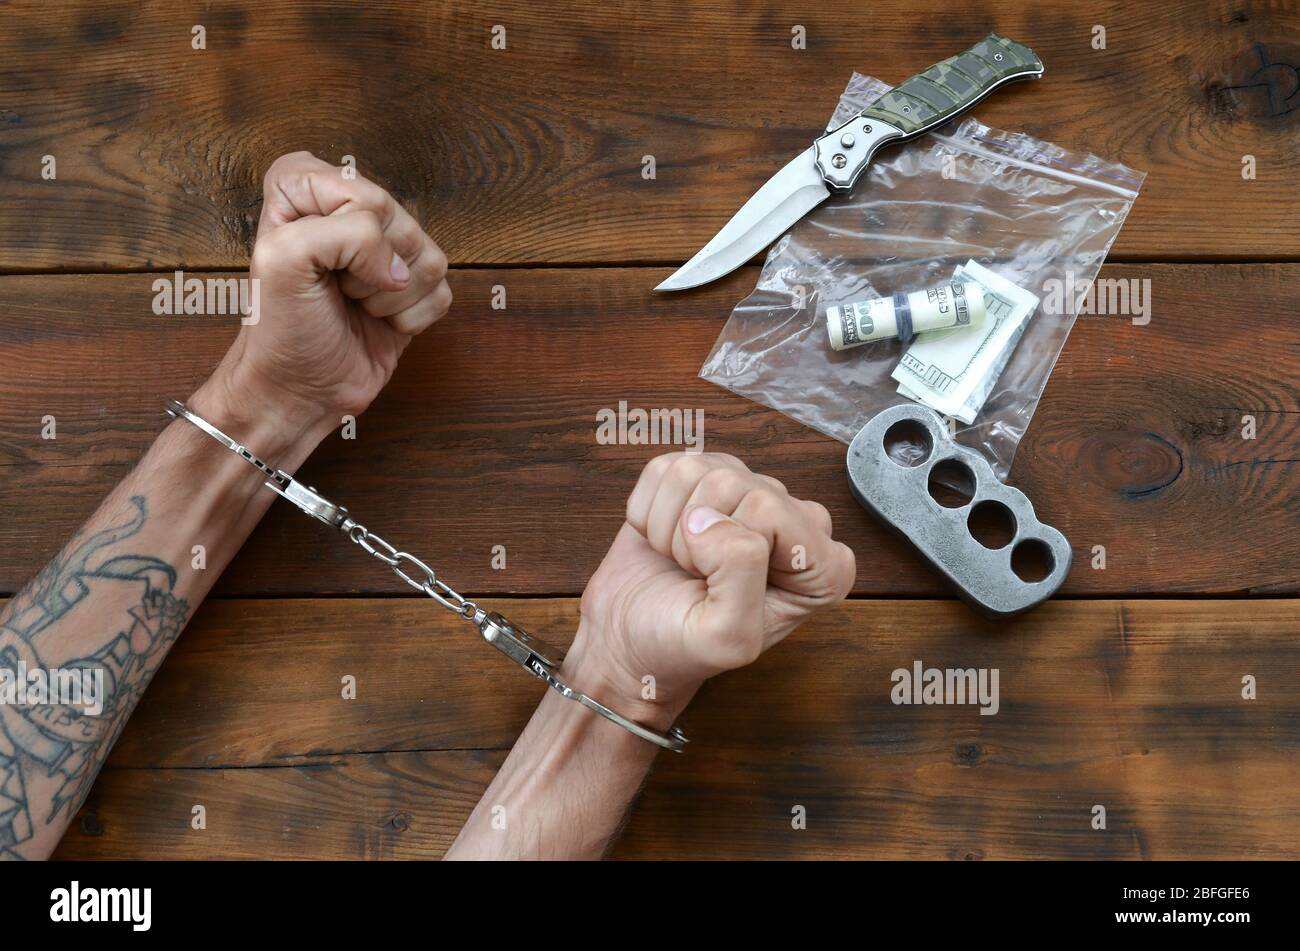 Cuffed hands of tattooed criminal suspect and plastic ziplock packet of evidence for investigation. Dirty money bills with jackknife and brass knuckle Stock Photo